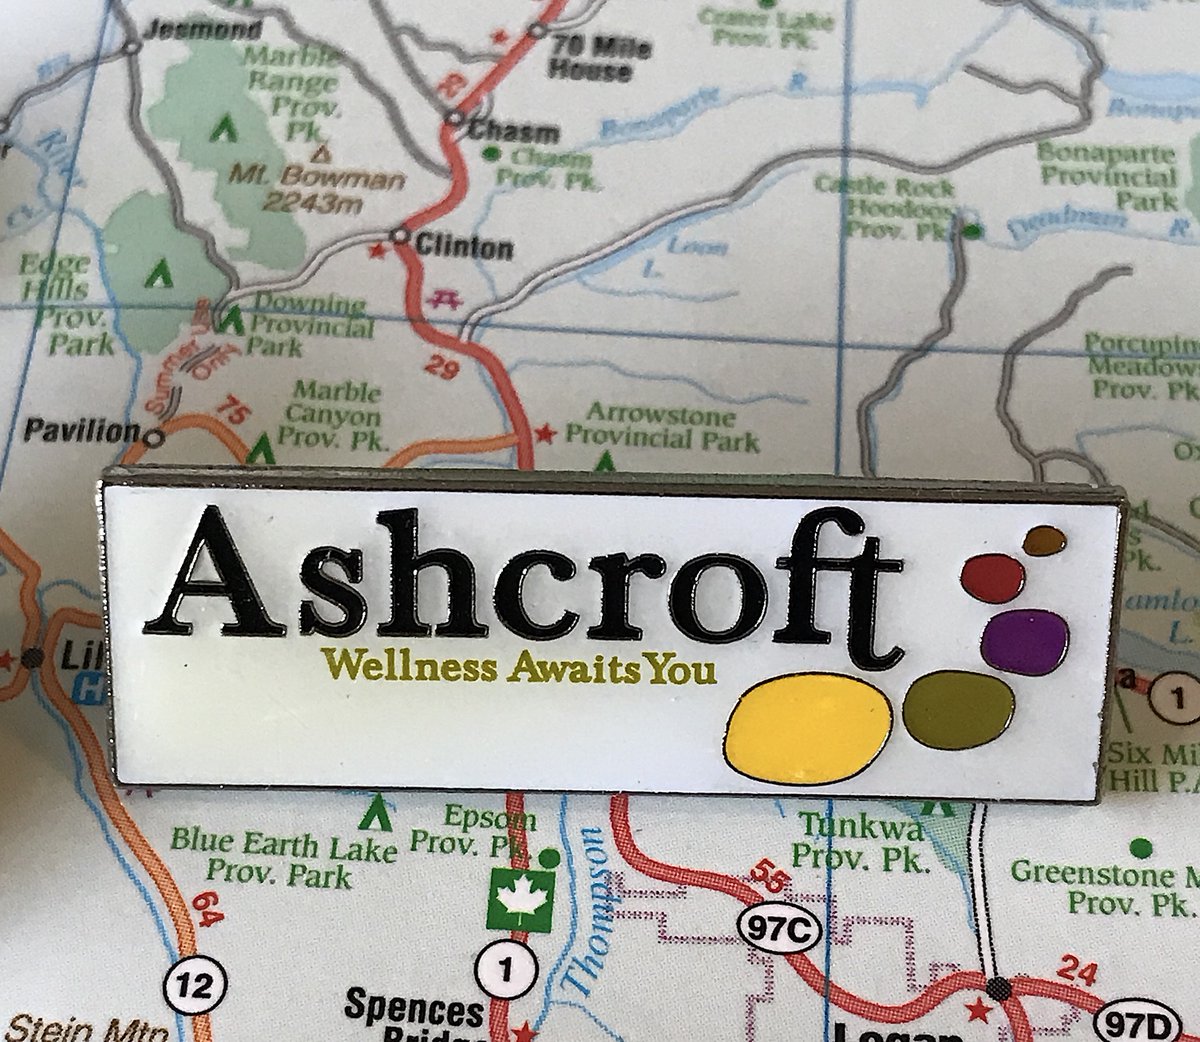 89. ASHCROFT- Love them repping the heritage fire hall- Weird to say "welcome to our town! we're a gateway to other things!"- The new logo promises "Wellness", and that's...that's a strange thing for a town to promise